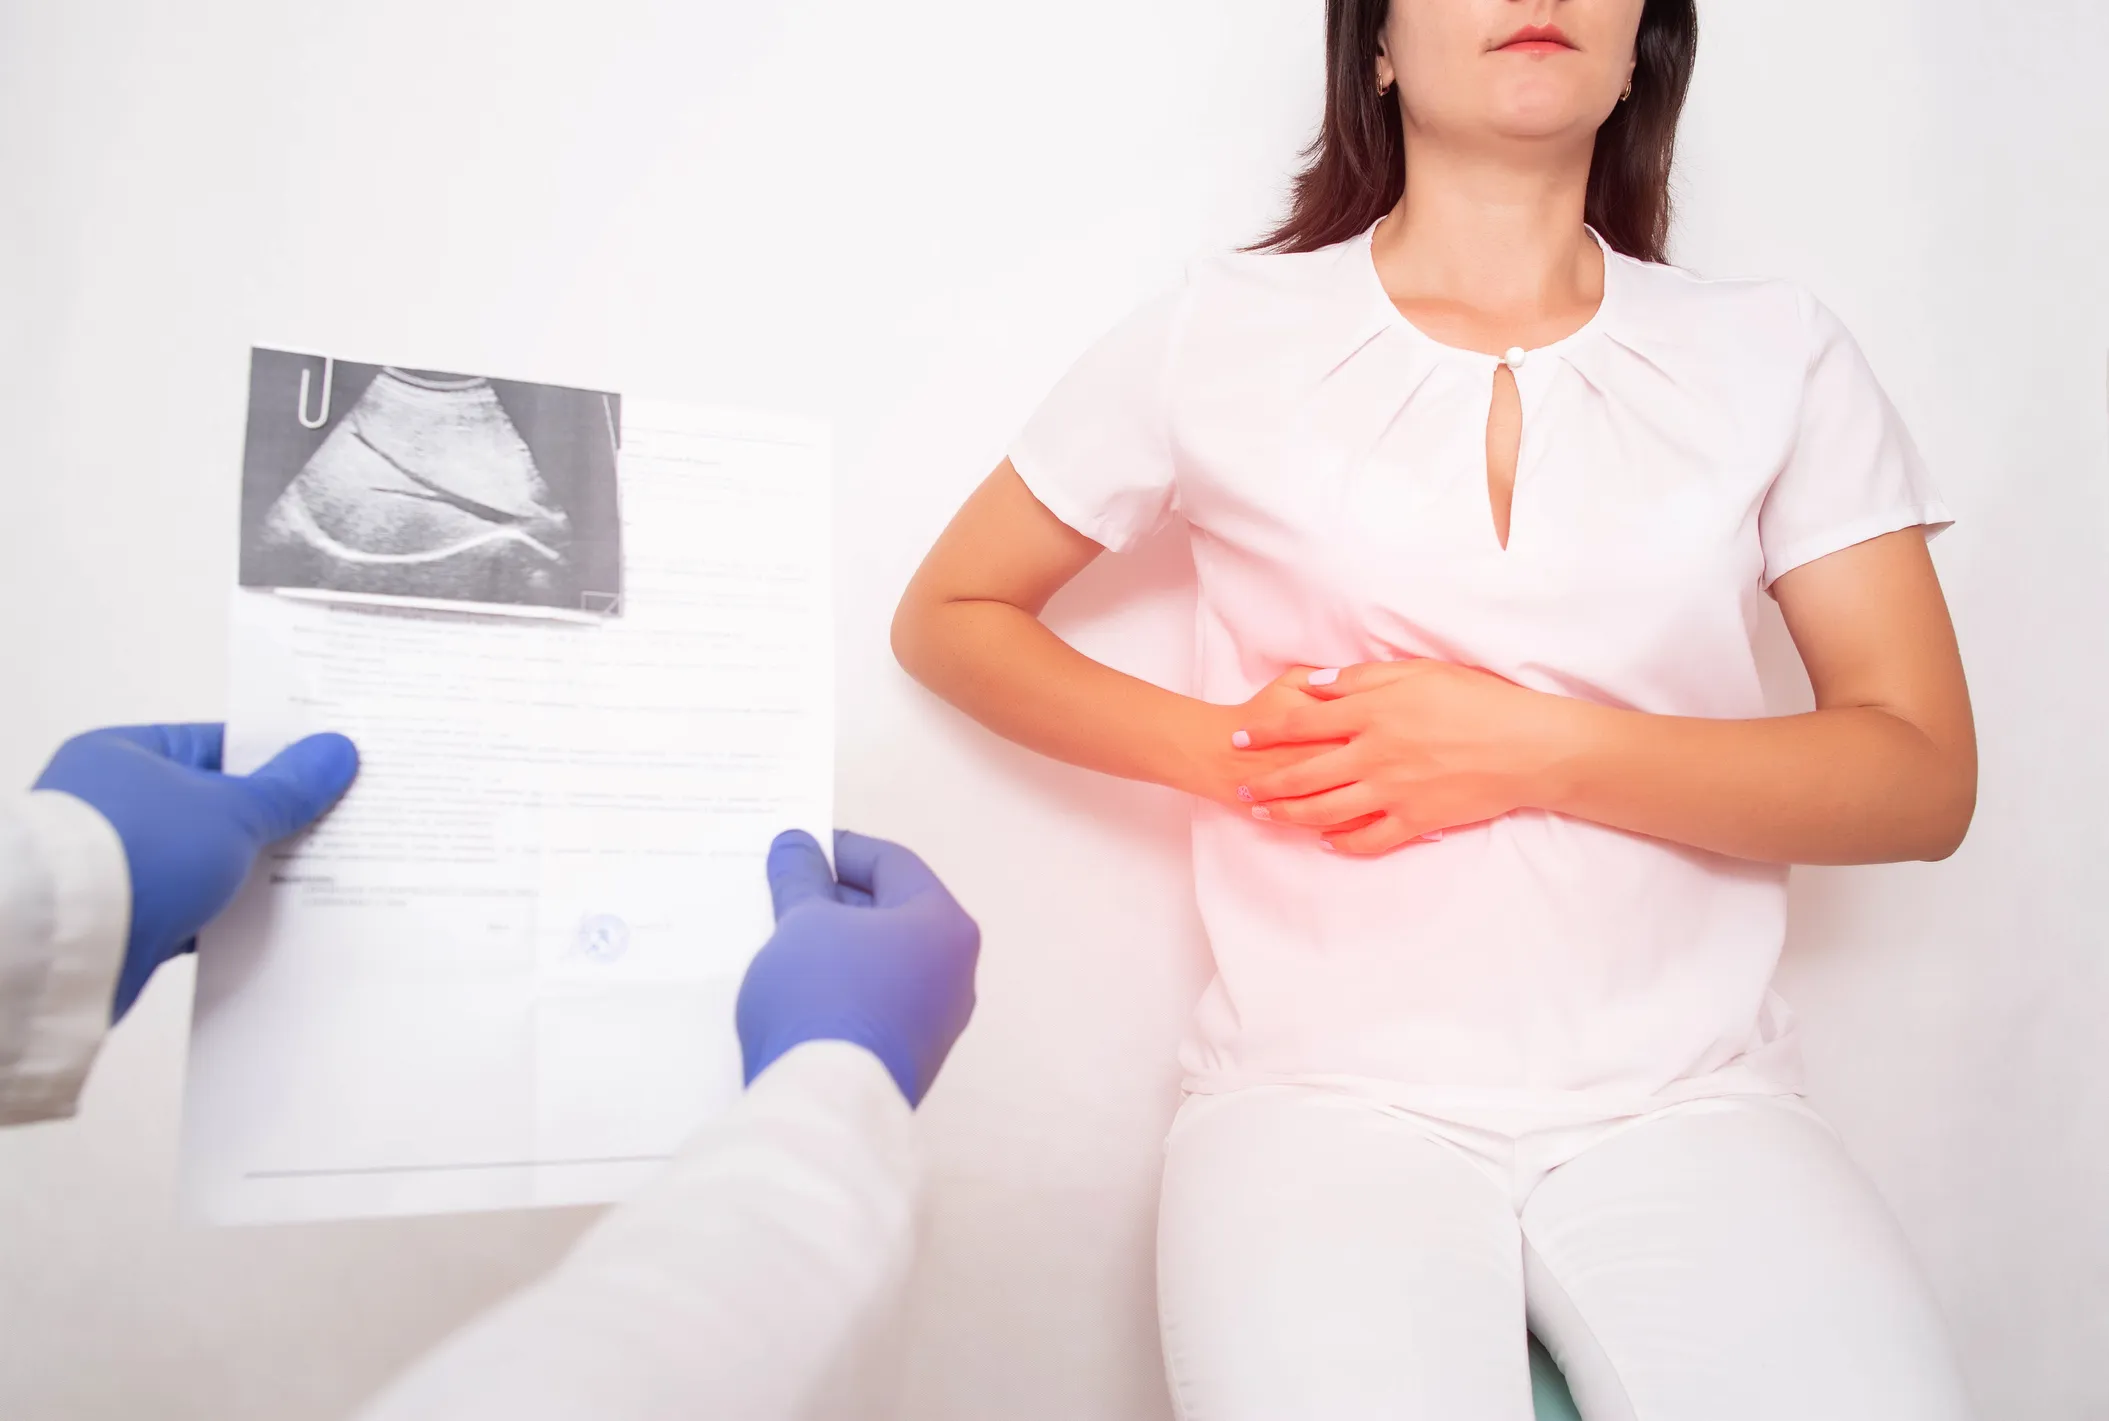 What are the Symptoms of Gallbladder Attack and the Treatment for Gallbladder Attack?